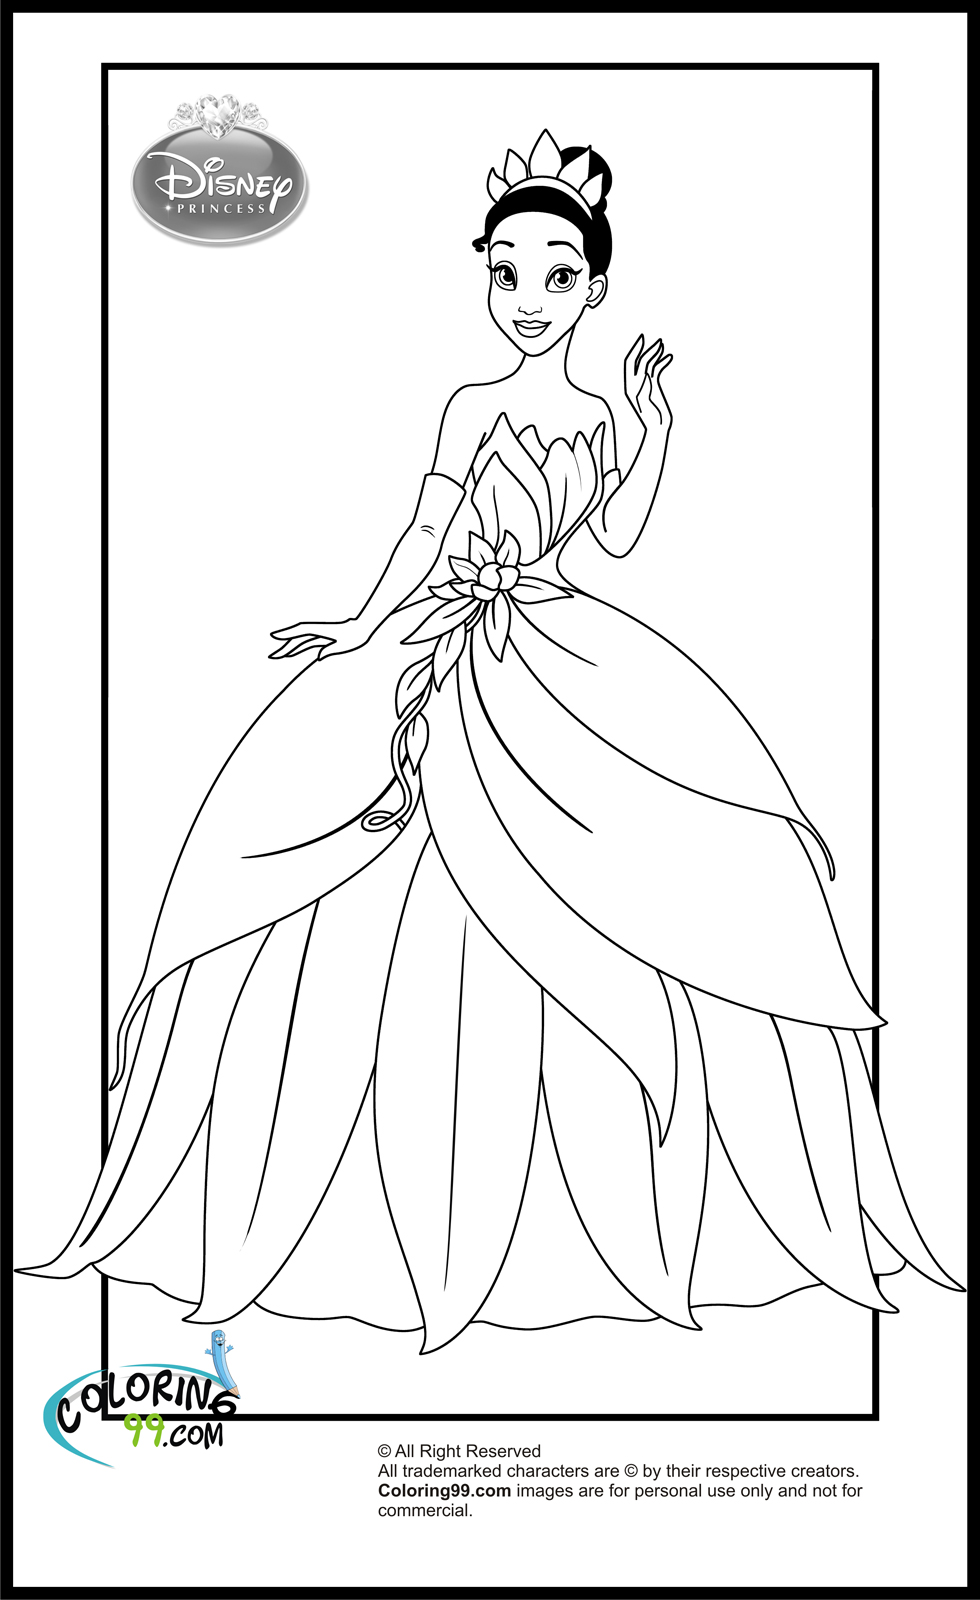 Disney Princess Coloring Pages Team Colors BEDECOR Free Coloring Picture wallpaper give a chance to color on the wall without getting in trouble! Fill the walls of your home or office with stress-relieving [bedroomdecorz.blogspot.com]